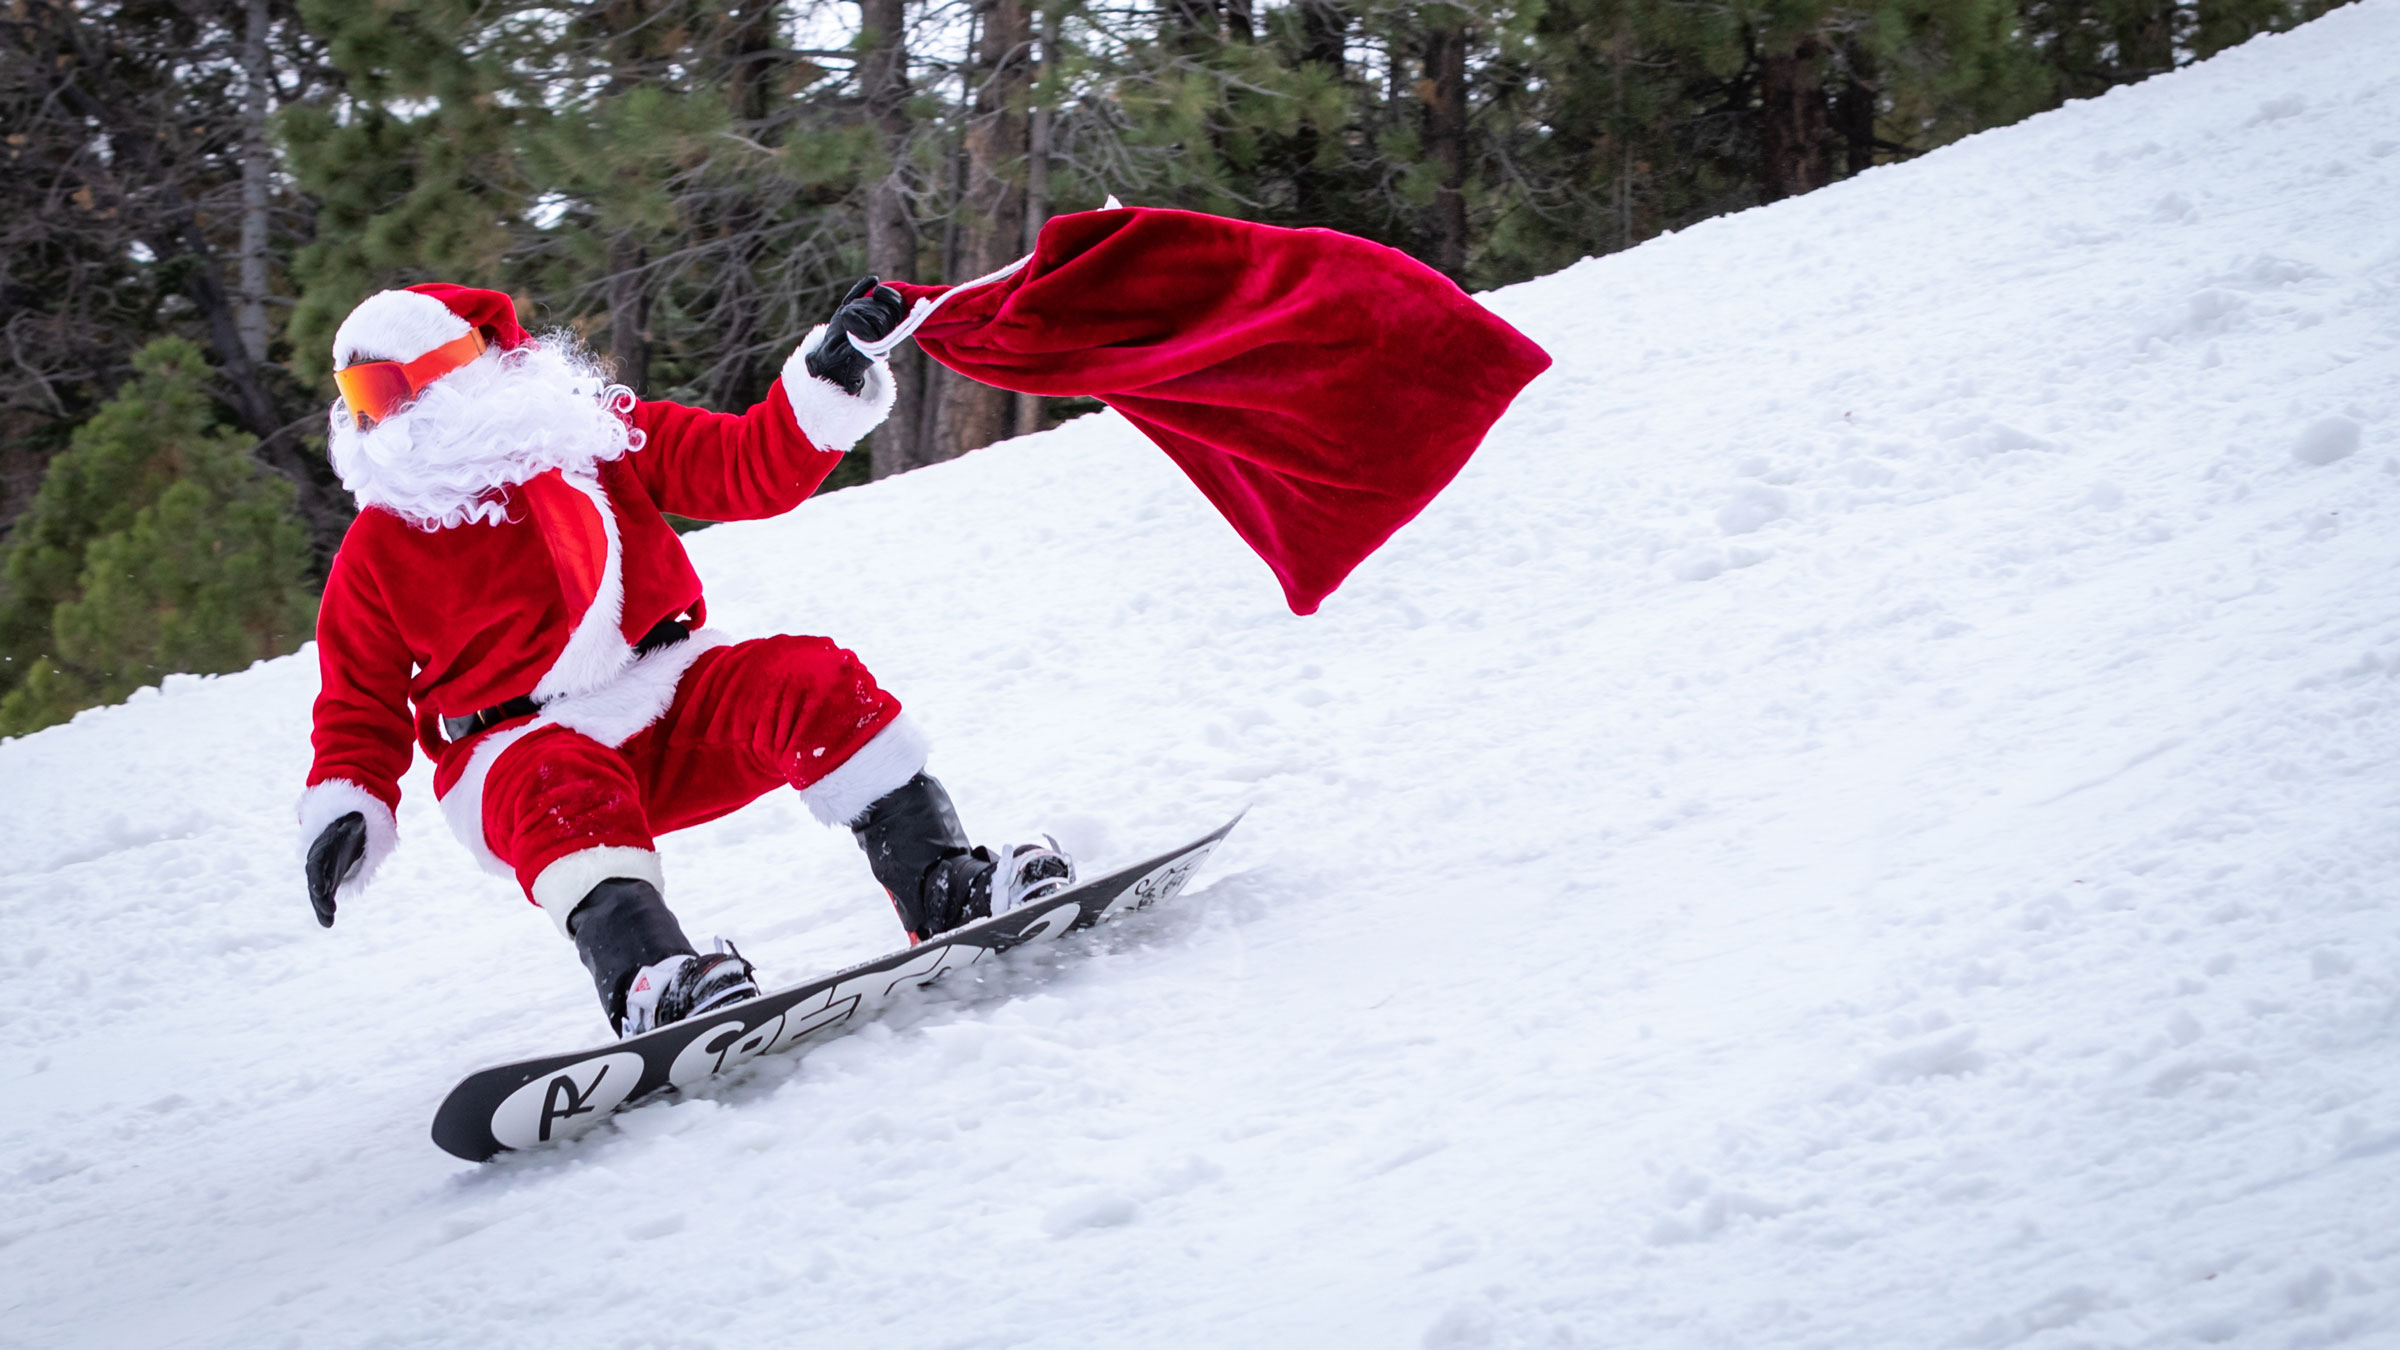 santa snowboarding down a snow ski slope with a red bag in his hands